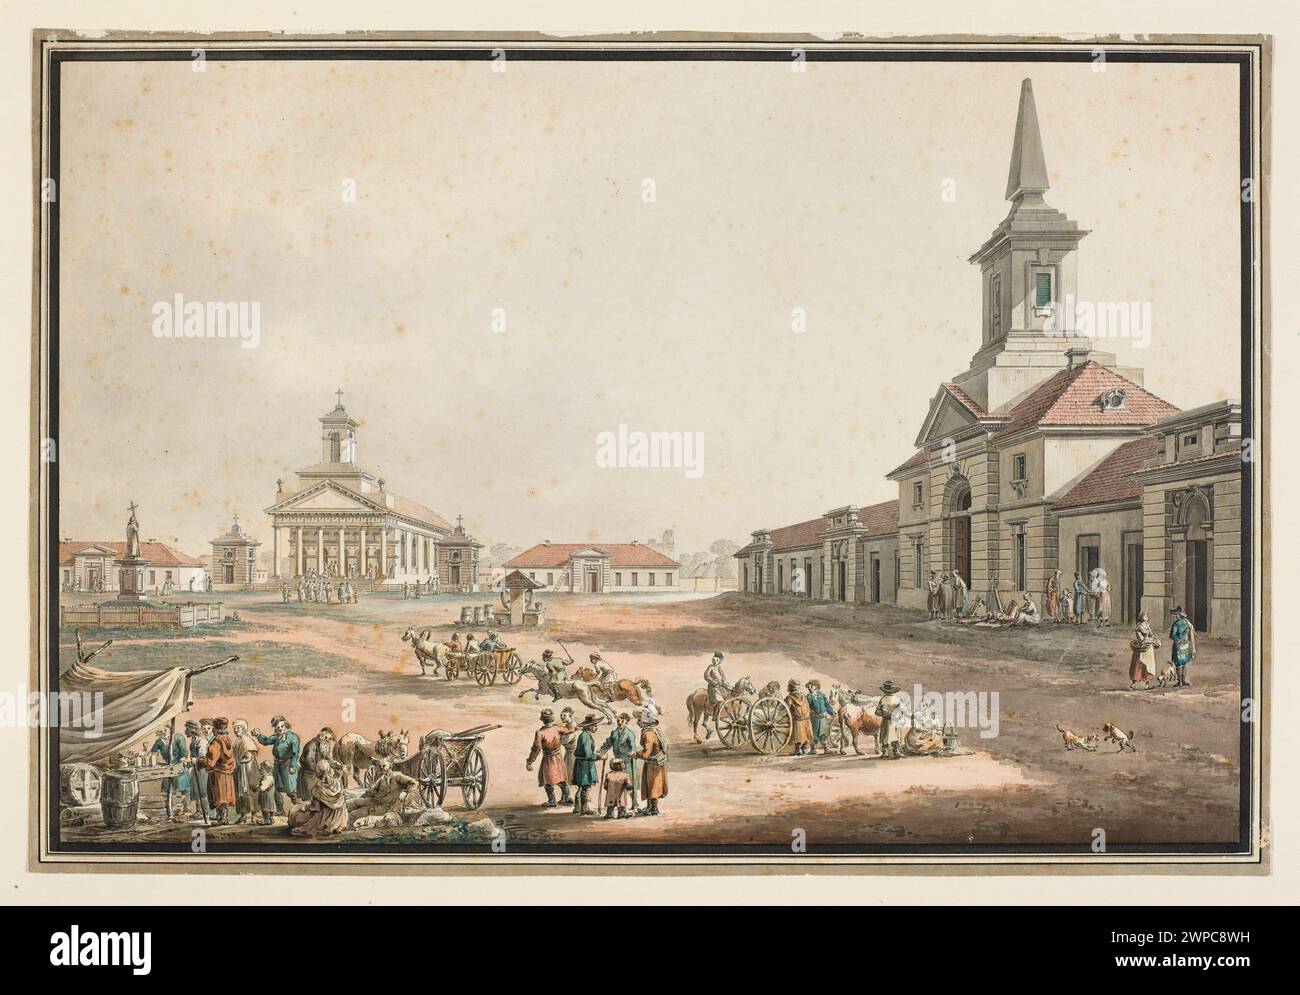 Market with the town hall and the church in Kock; Vogel, Zygmunt (1764-1826); 1796 (1796-00-00-1797-00-00);Jabłonowski (family) - residences, Kock (Lubelskie Voivodeship), Stanisława - collection, Szeptycka, Szymon Bogumił (1733-1807) - architecture, Zug, architecture, urban trade, classicism (style), churches (architect), cities, Saves (architect), Rynek (Urban planning), genre scenes, street scene, views of the village, purchase (provenance) Stock Photo